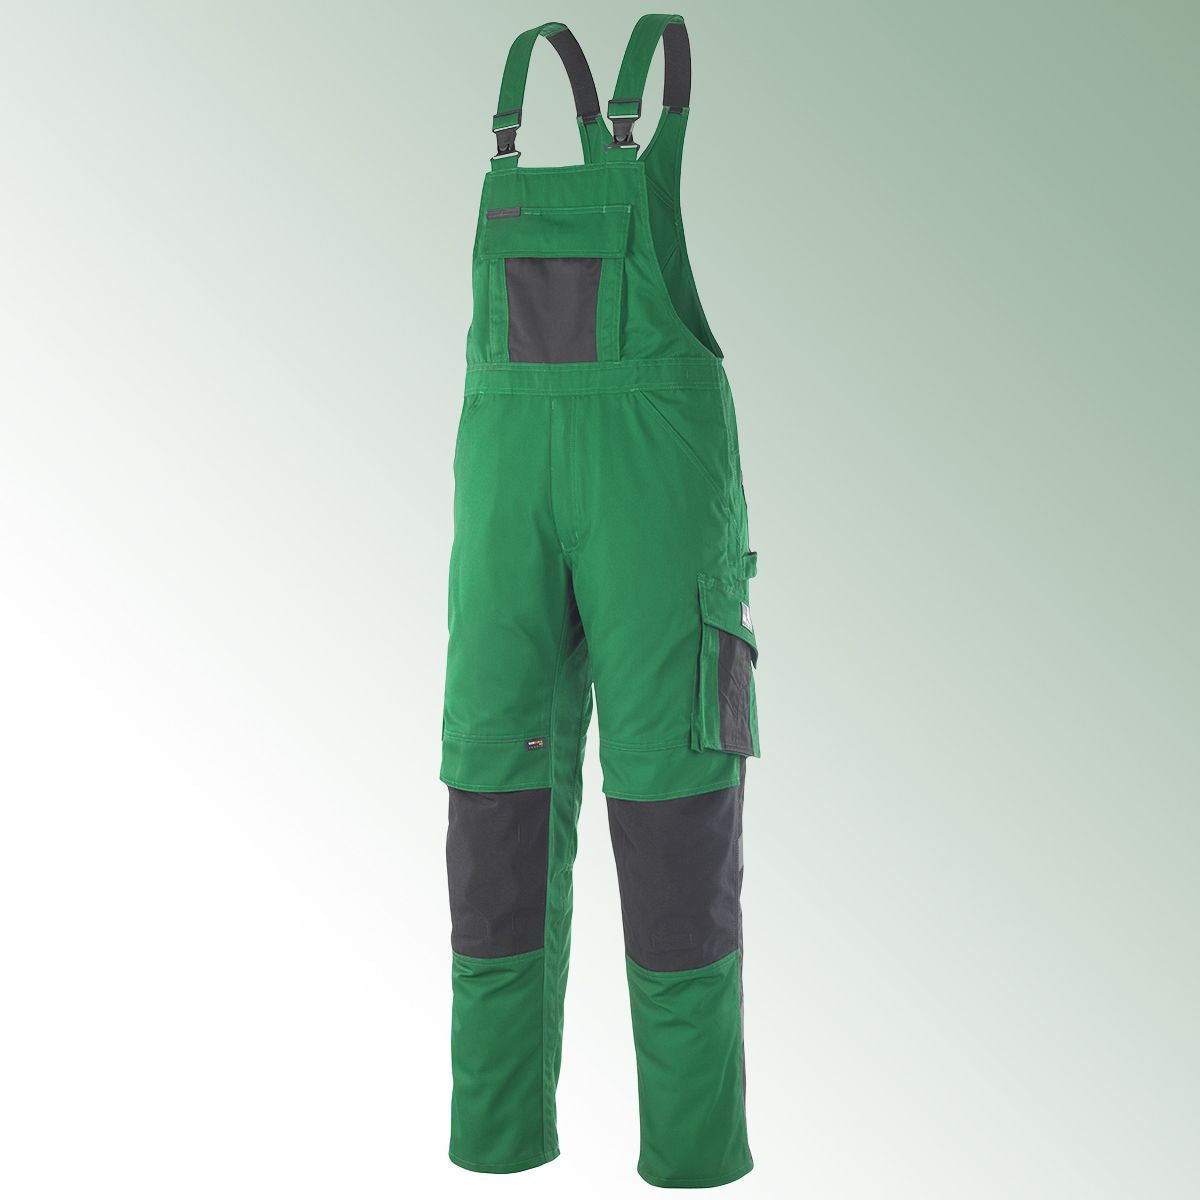 Dungarees Augsburg Size 46 Green / Black